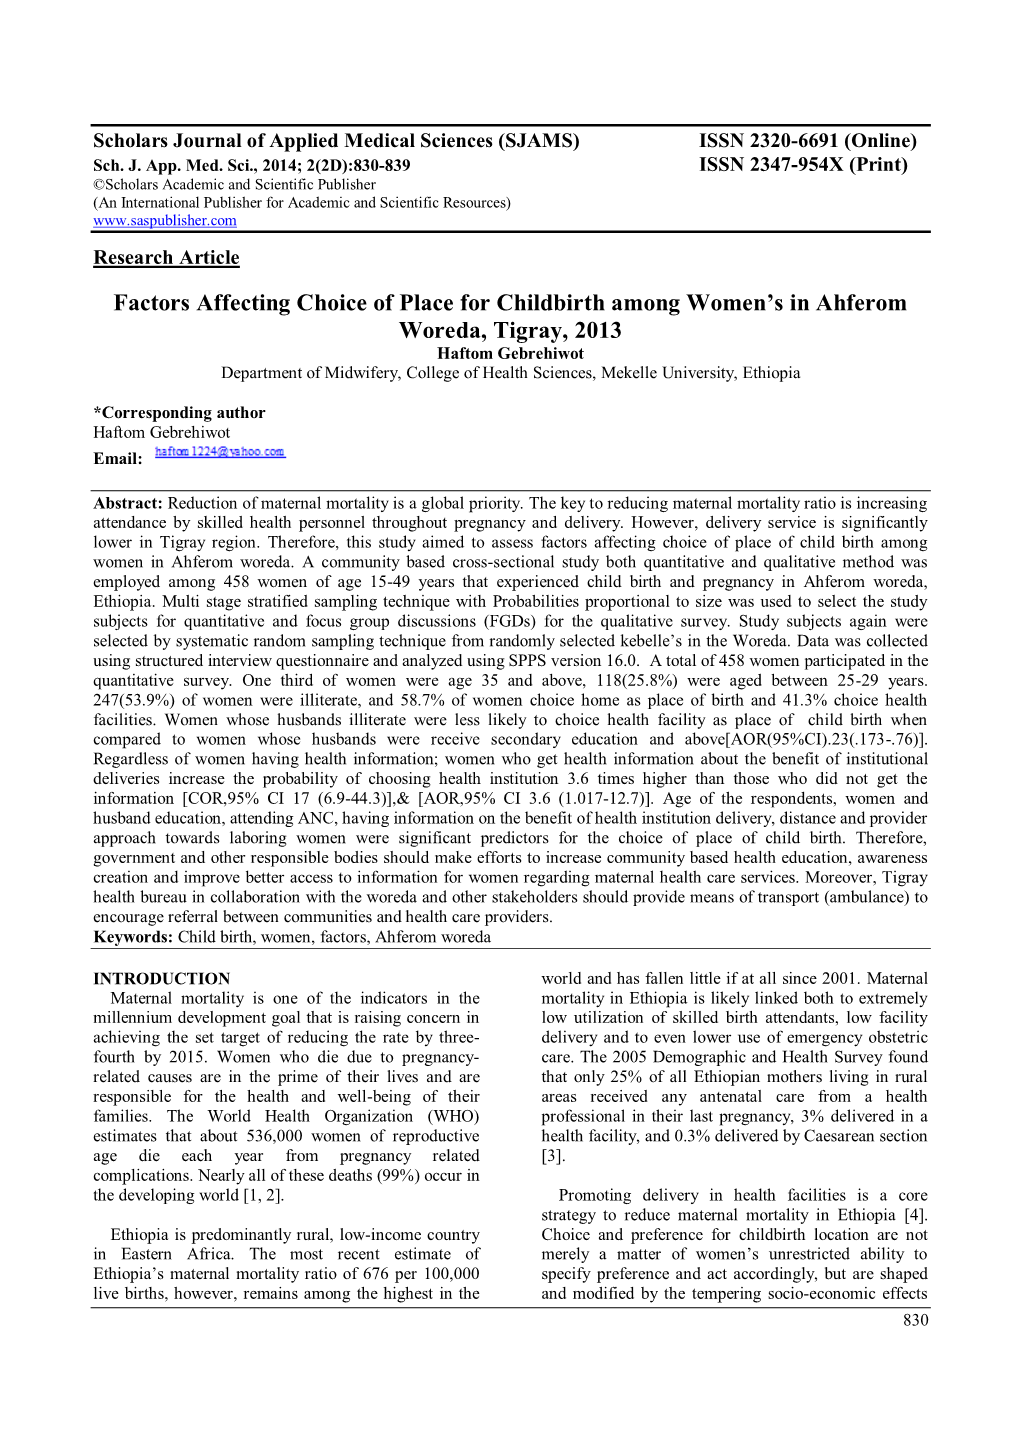 Factors Affecting Choice of Place for Childbirth Among Women's in Ahferom Woreda, Tigray, 2013